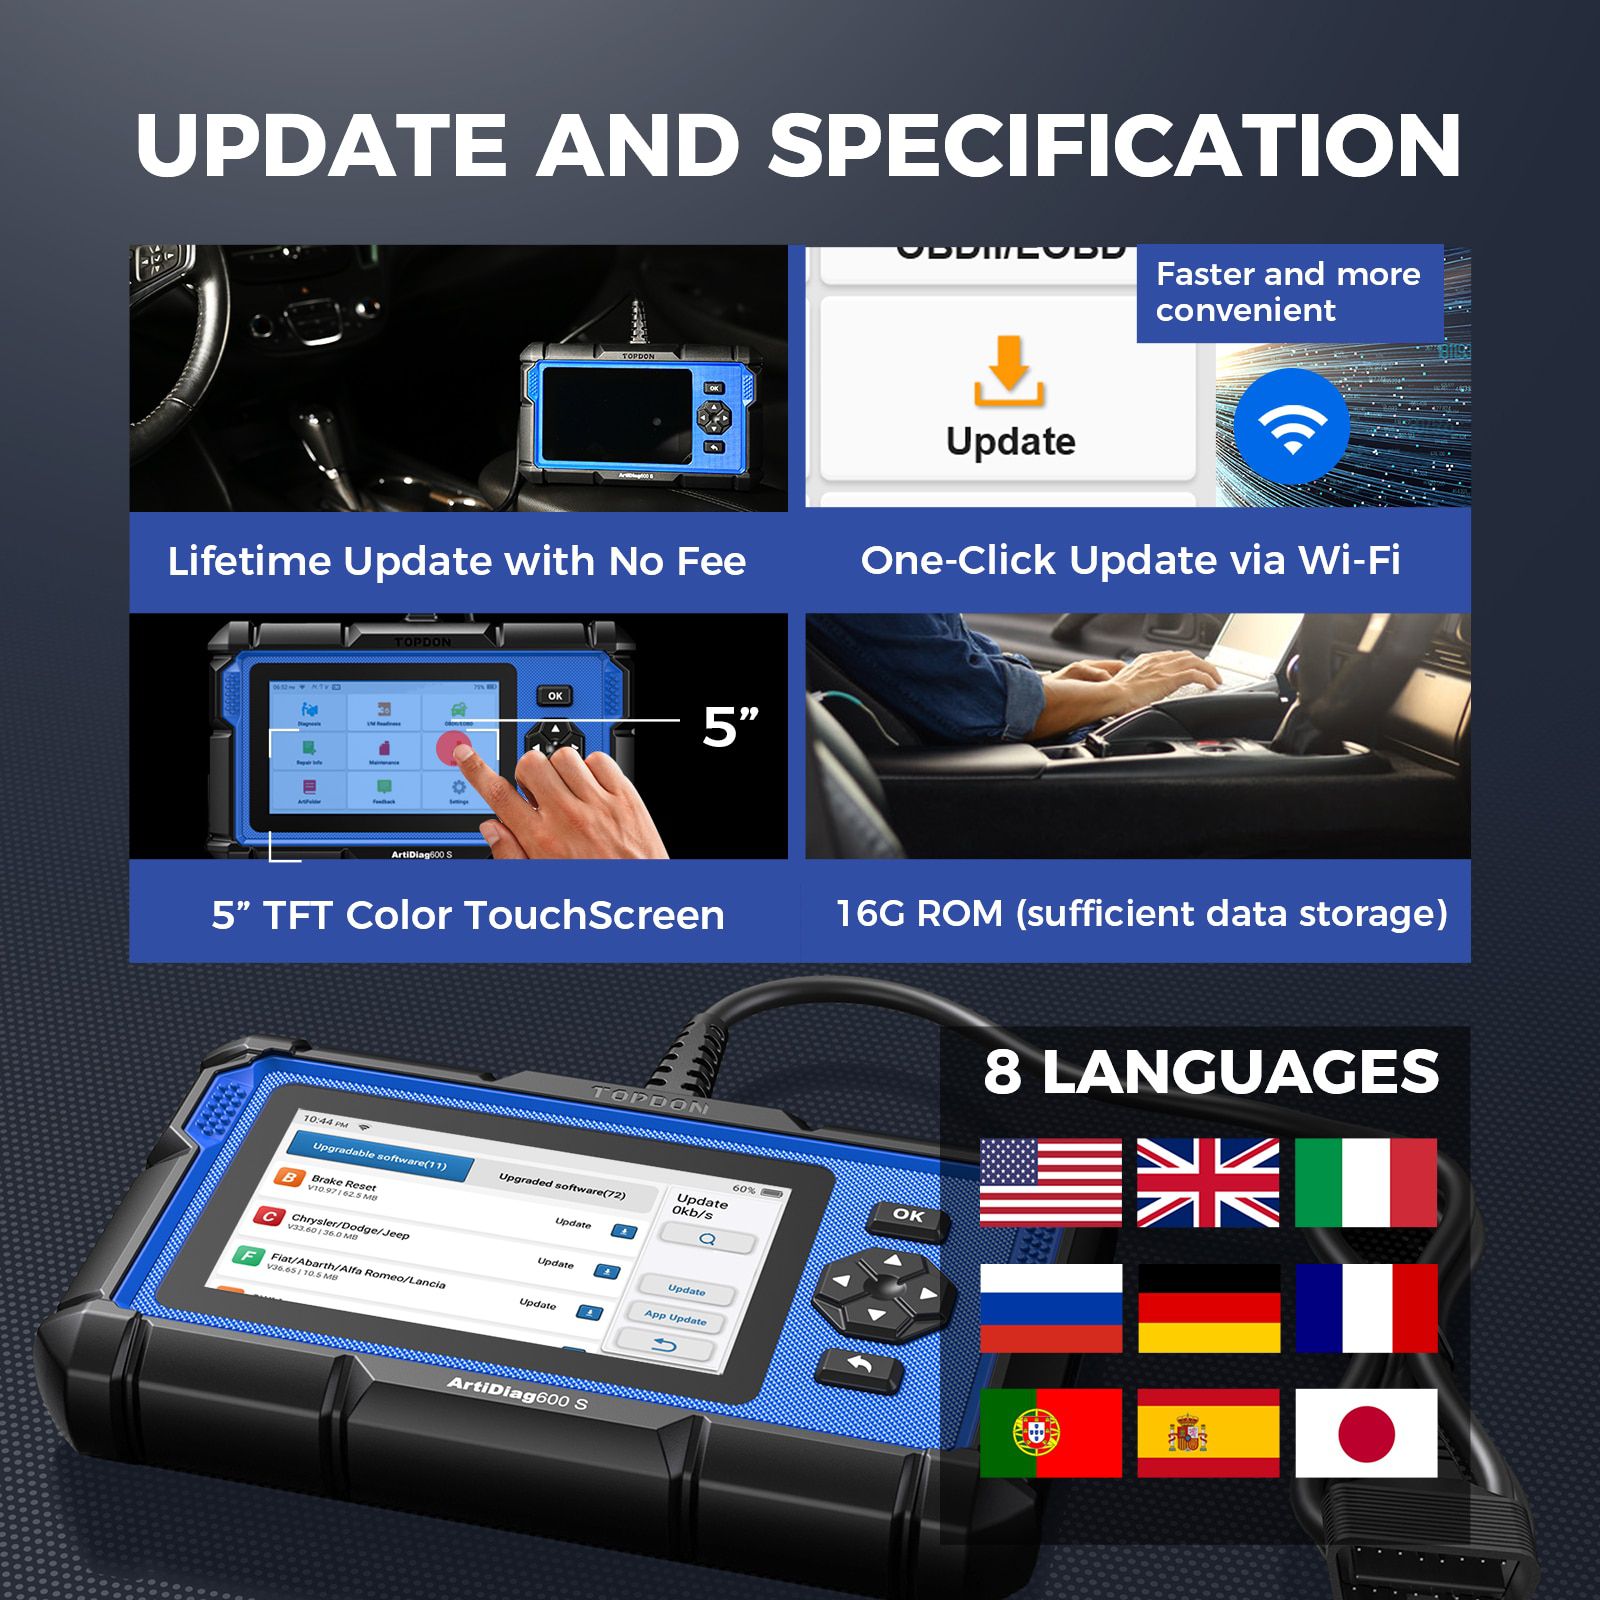 Topdon artidiag600s Automotive Diagnostic tool Automated OBD2 encoder Reader Scanning Tool full System Diagnostic tool